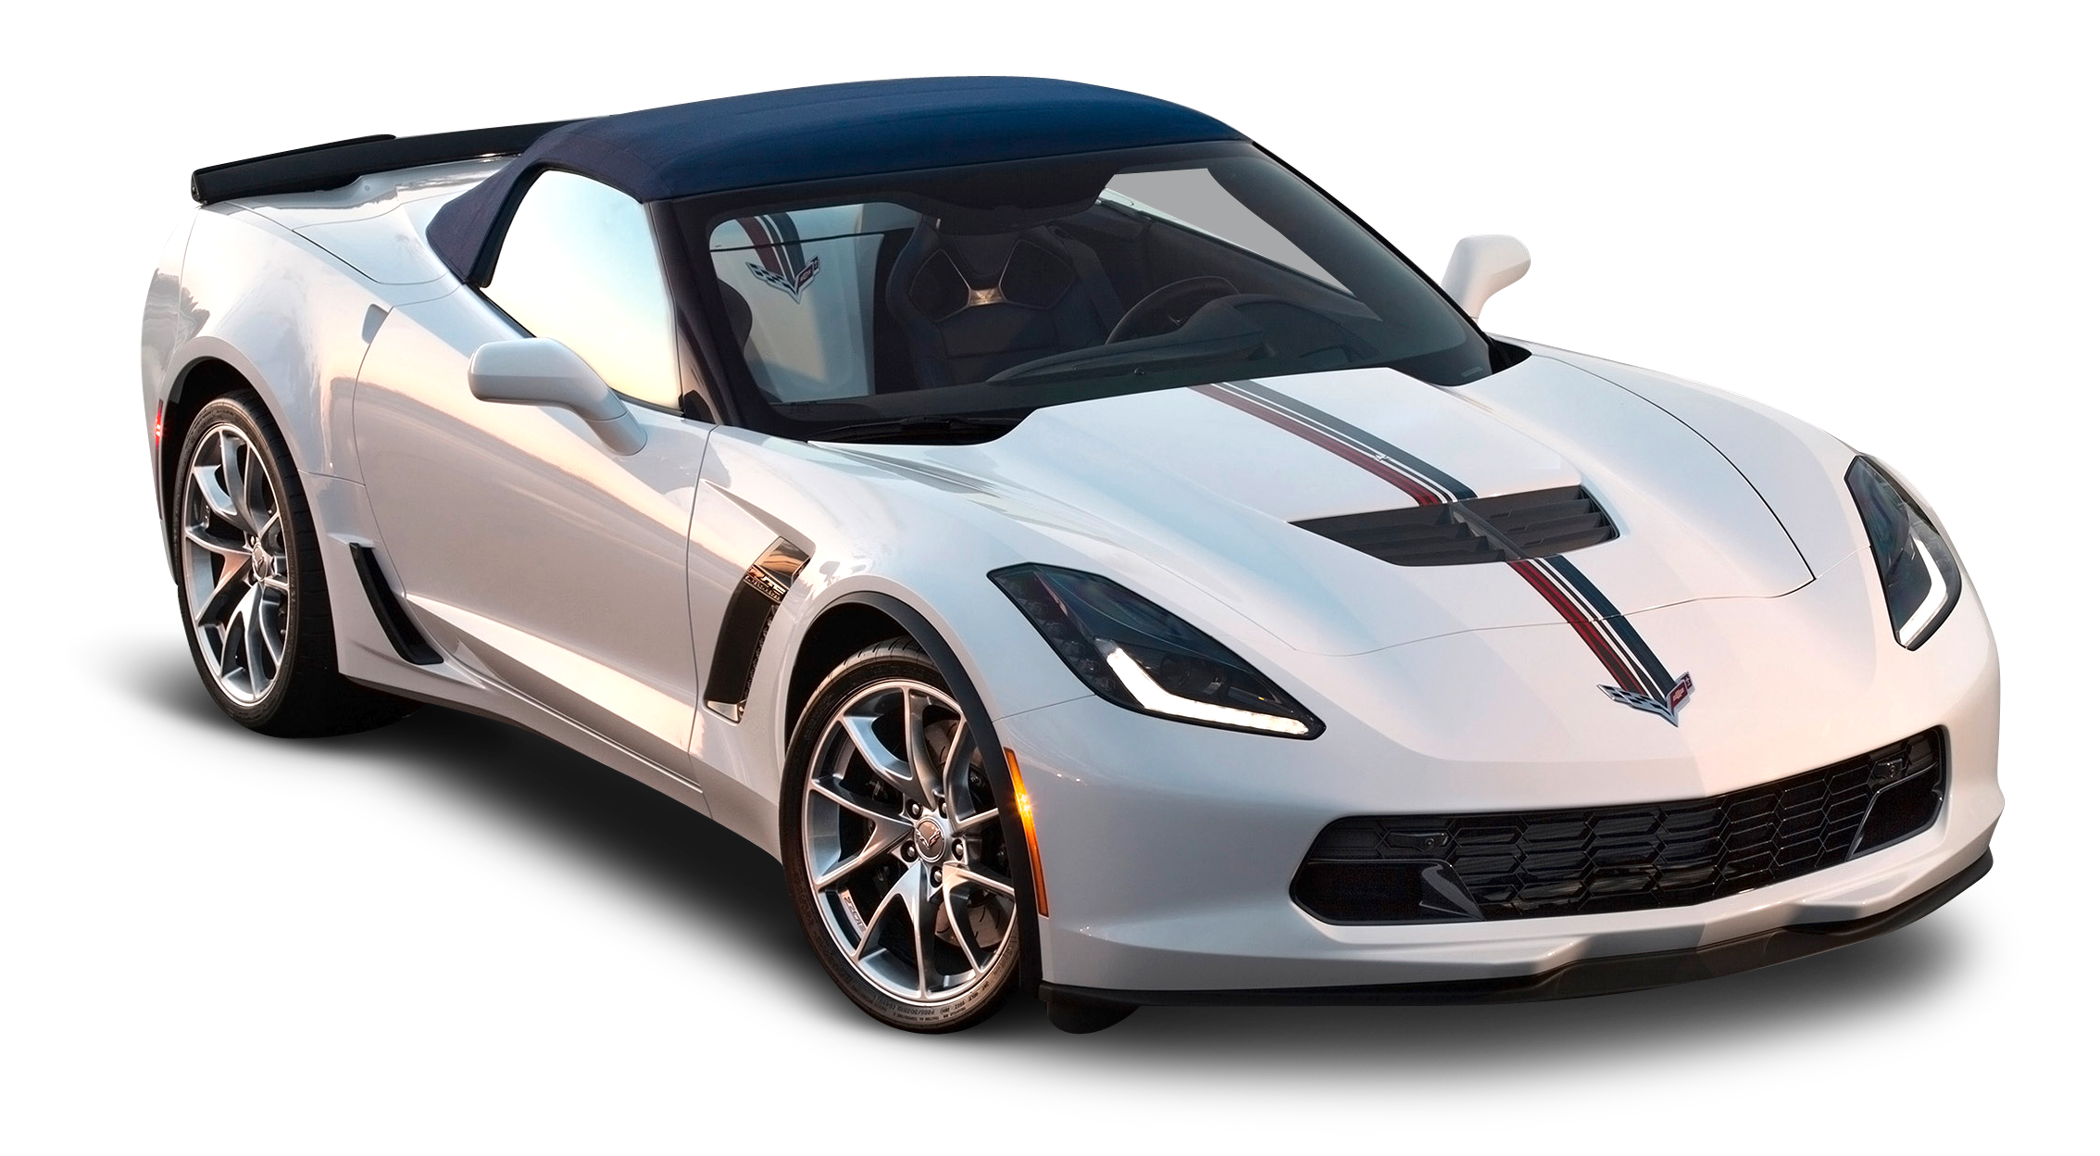 A White Sports Car With Black Roof